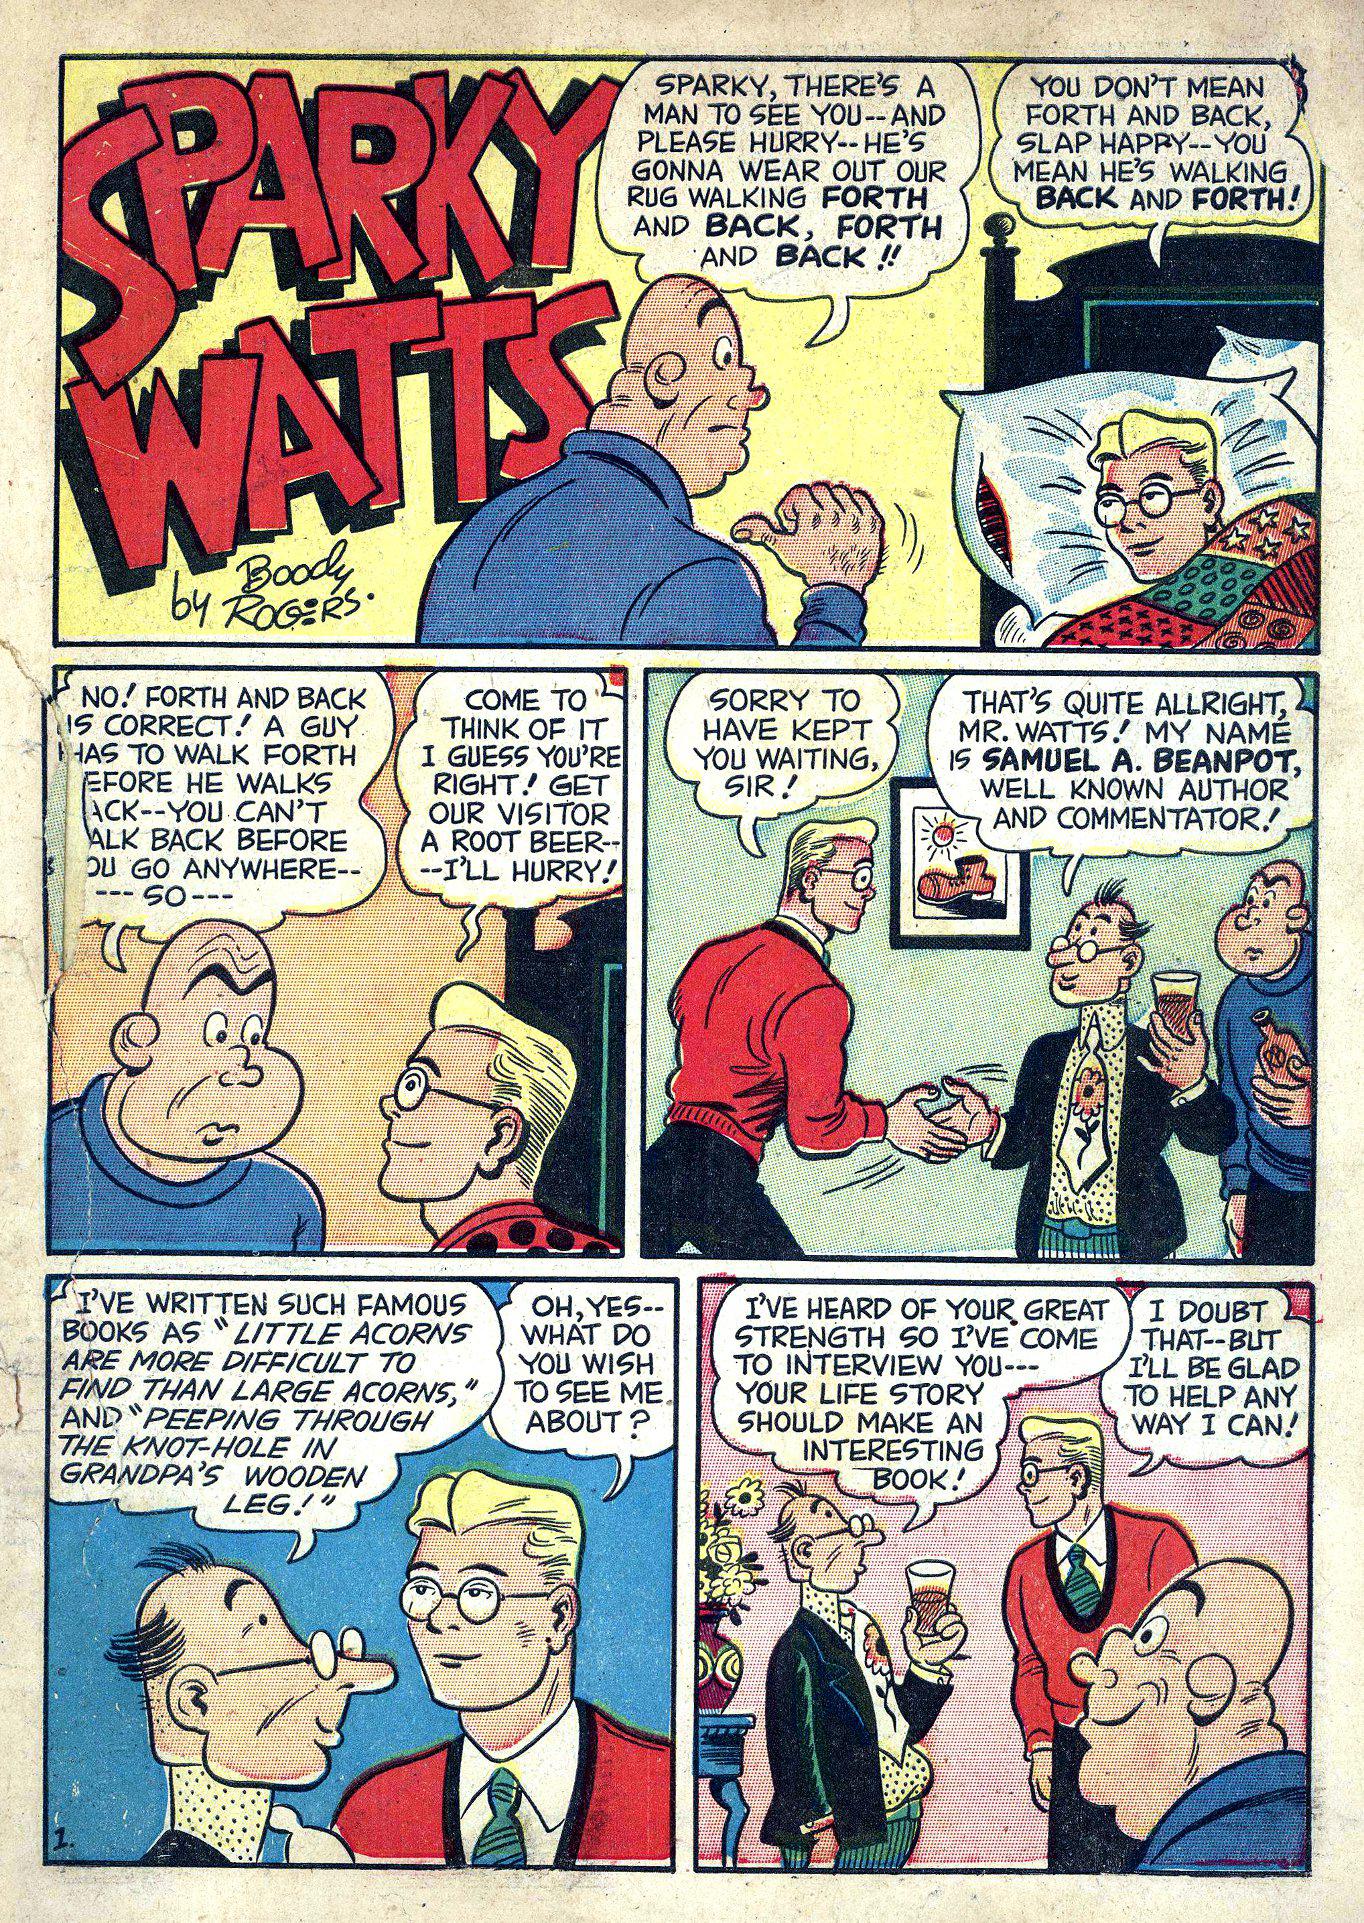 Read online Sparky Watts comic -  Issue #7 - 3